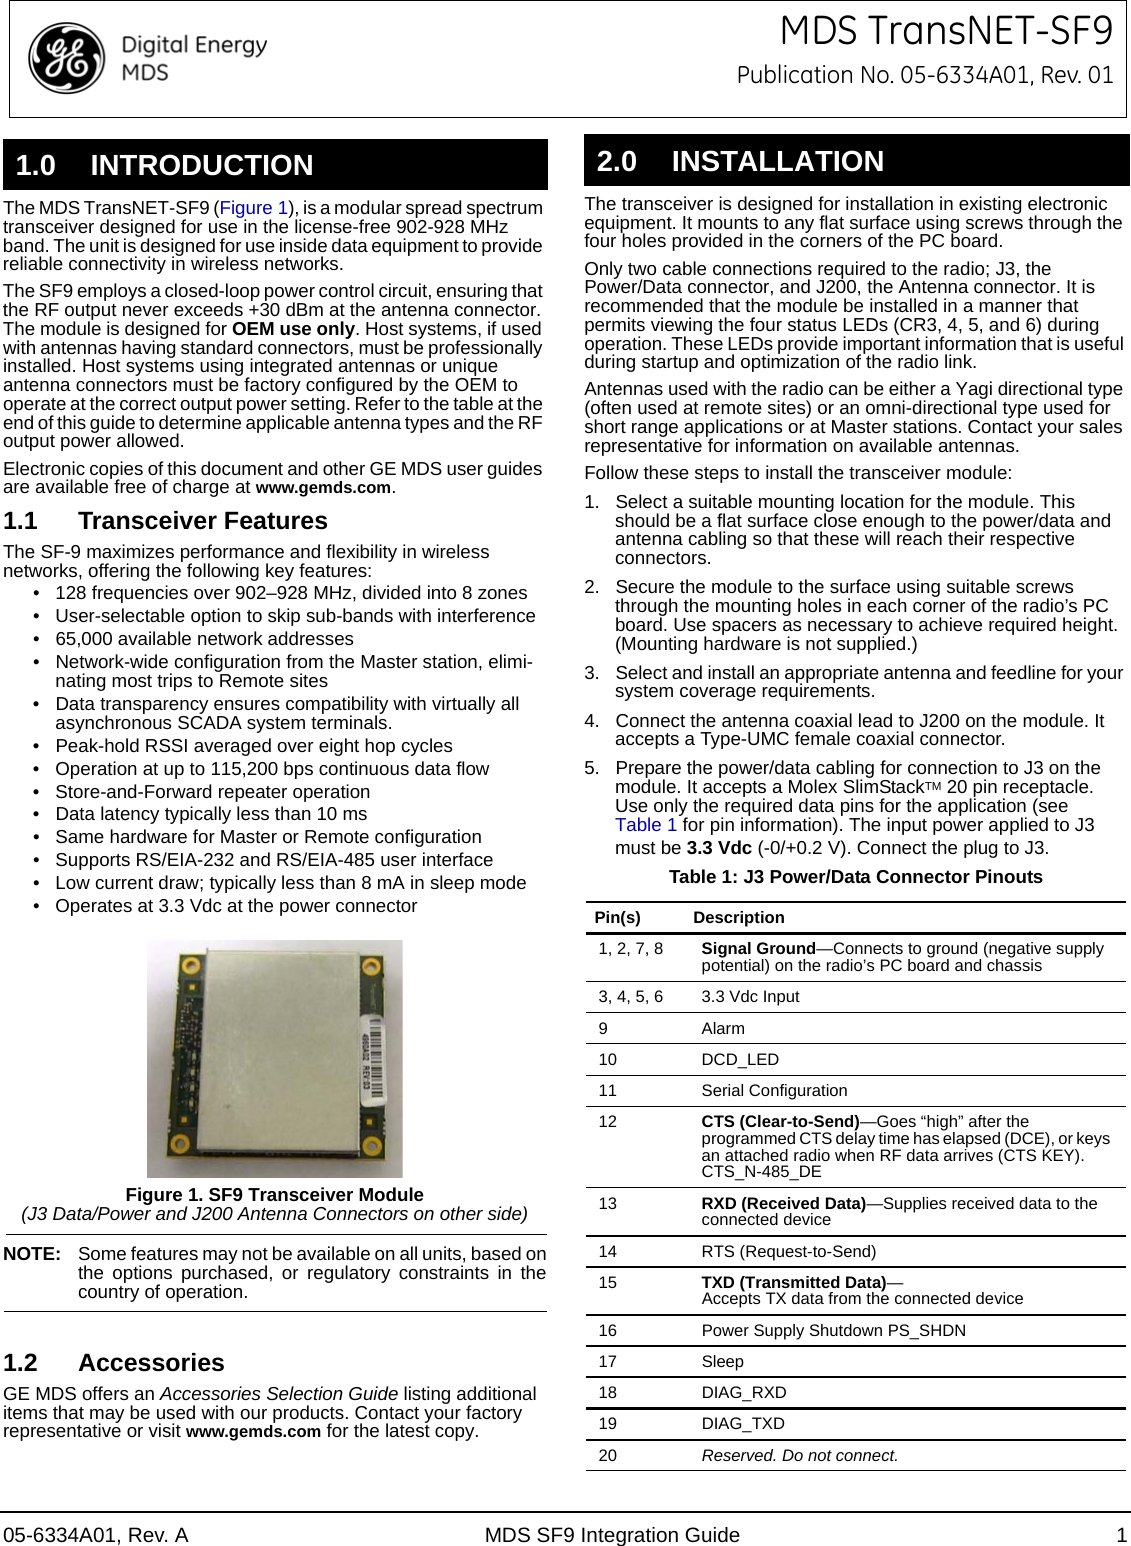 1.0 INTRODUCTION05-6334A01, Rev. A MDS SF9 Integration Guide 1MDS TransNET-SF9Publication No. 05-6334A01, Rev. 01The MDS TransNET-SF9 (Figure 1), is a modular spread spectrum transceiver designed for use in the license-free 902-928 MHz band. The unit is designed for use inside data equipment to provide reliable connectivity in wireless networks.The SF9 employs a closed-loop power control circuit, ensuring that the RF output never exceeds +30 dBm at the antenna connector. The module is designed for OEM use only. Host systems, if used with antennas having standard connectors, must be professionally installed. Host systems using integrated antennas or unique antenna connectors must be factory configured by the OEM to operate at the correct output power setting. Refer to the table at the end of this guide to determine applicable antenna types and the RF output power allowed.Electronic copies of this document and other GE MDS user guides are available free of charge at www.gemds.com.1.1 Transceiver FeaturesThe SF-9 maximizes performance and flexibility in wireless networks, offering the following key features:• 128 frequencies over 902–928 MHz, divided into 8 zones• User-selectable option to skip sub-bands with interference• 65,000 available network addresses• Network-wide configuration from the Master station, elimi-nating most trips to Remote sites• Data transparency ensures compatibility with virtually all asynchronous SCADA system terminals.• Peak-hold RSSI averaged over eight hop cycles• Operation at up to 115,200 bps continuous data flow• Store-and-Forward repeater operation• Data latency typically less than 10 ms• Same hardware for Master or Remote configuration• Supports RS/EIA-232 and RS/EIA-485 user interface• Low current draw; typically less than 8 mA in sleep mode• Operates at 3.3 Vdc at the power connectorFigure 1. SF9 Transceiver Module(J3 Data/Power and J200 Antenna Connectors on other side)NOTE: Some features may not be available on all units, based on the options purchased, or regulatory constraints in the country of operation.1.2 AccessoriesGE MDS offers an Accessories Selection Guide listing additional items that may be used with our products. Contact your factory representative or visit www.gemds.com for the latest copy.2.0 INSTALLATIONThe transceiver is designed for installation in existing electronic equipment. It mounts to any flat surface using screws through the four holes provided in the corners of the PC board.Only two cable connections required to the radio; J3, the Power/Data connector, and J200, the Antenna connector. It is recommended that the module be installed in a manner that permits viewing the four status LEDs (CR3, 4, 5, and 6) during operation. These LEDs provide important information that is useful during startup and optimization of the radio link.Antennas used with the radio can be either a Yagi directional type (often used at remote sites) or an omni-directional type used for short range applications or at Master stations. Contact your sales representative for information on available antennas.Follow these steps to install the transceiver module:1. Select a suitable mounting location for the module. This should be a flat surface close enough to the power/data and antenna cabling so that these will reach their respective connectors. 2. Secure the module to the surface using suitable screws through the mounting holes in each corner of the radio’s PC board. Use spacers as necessary to achieve required height. (Mounting hardware is not supplied.)3. Select and install an appropriate antenna and feedline for your system coverage requirements.4. Connect the antenna coaxial lead to J200 on the module. It accepts a Type-UMC female coaxial connector.5. Prepare the power/data cabling for connection to J3 on the module. It accepts a Molex SlimStackTM 20 pin receptacle. Use only the required data pins for the application (see Table 1 for pin information). The input power applied to J3 must be 3.3 Vdc (-0/+0.2 V). Connect the plug to J3.Table 1: J3 Power/Data Connector PinoutsPin(s) Description1, 2, 7, 8 Signal Ground—Connects to ground (negative supply potential) on the radio’s PC board and chassis3, 4, 5, 6 3.3 Vdc Input9Alarm10 DCD_LED11 Serial Configuration12 CTS (Clear-to-Send)—Goes “high” after the programmed CTS delay time has elapsed (DCE), or keys an attached radio when RF data arrives (CTS KEY). CTS_N-485_DE 13 RXD (Received Data)—Supplies received data to the connected device14 RTS (Request-to-Send)15 TXD (Transmitted Data)—Accepts TX data from the connected device16 Power Supply Shutdown PS_SHDN17 Sleep18 DIAG_RXD19 DIAG_TXD20 Reserved. Do not connect.